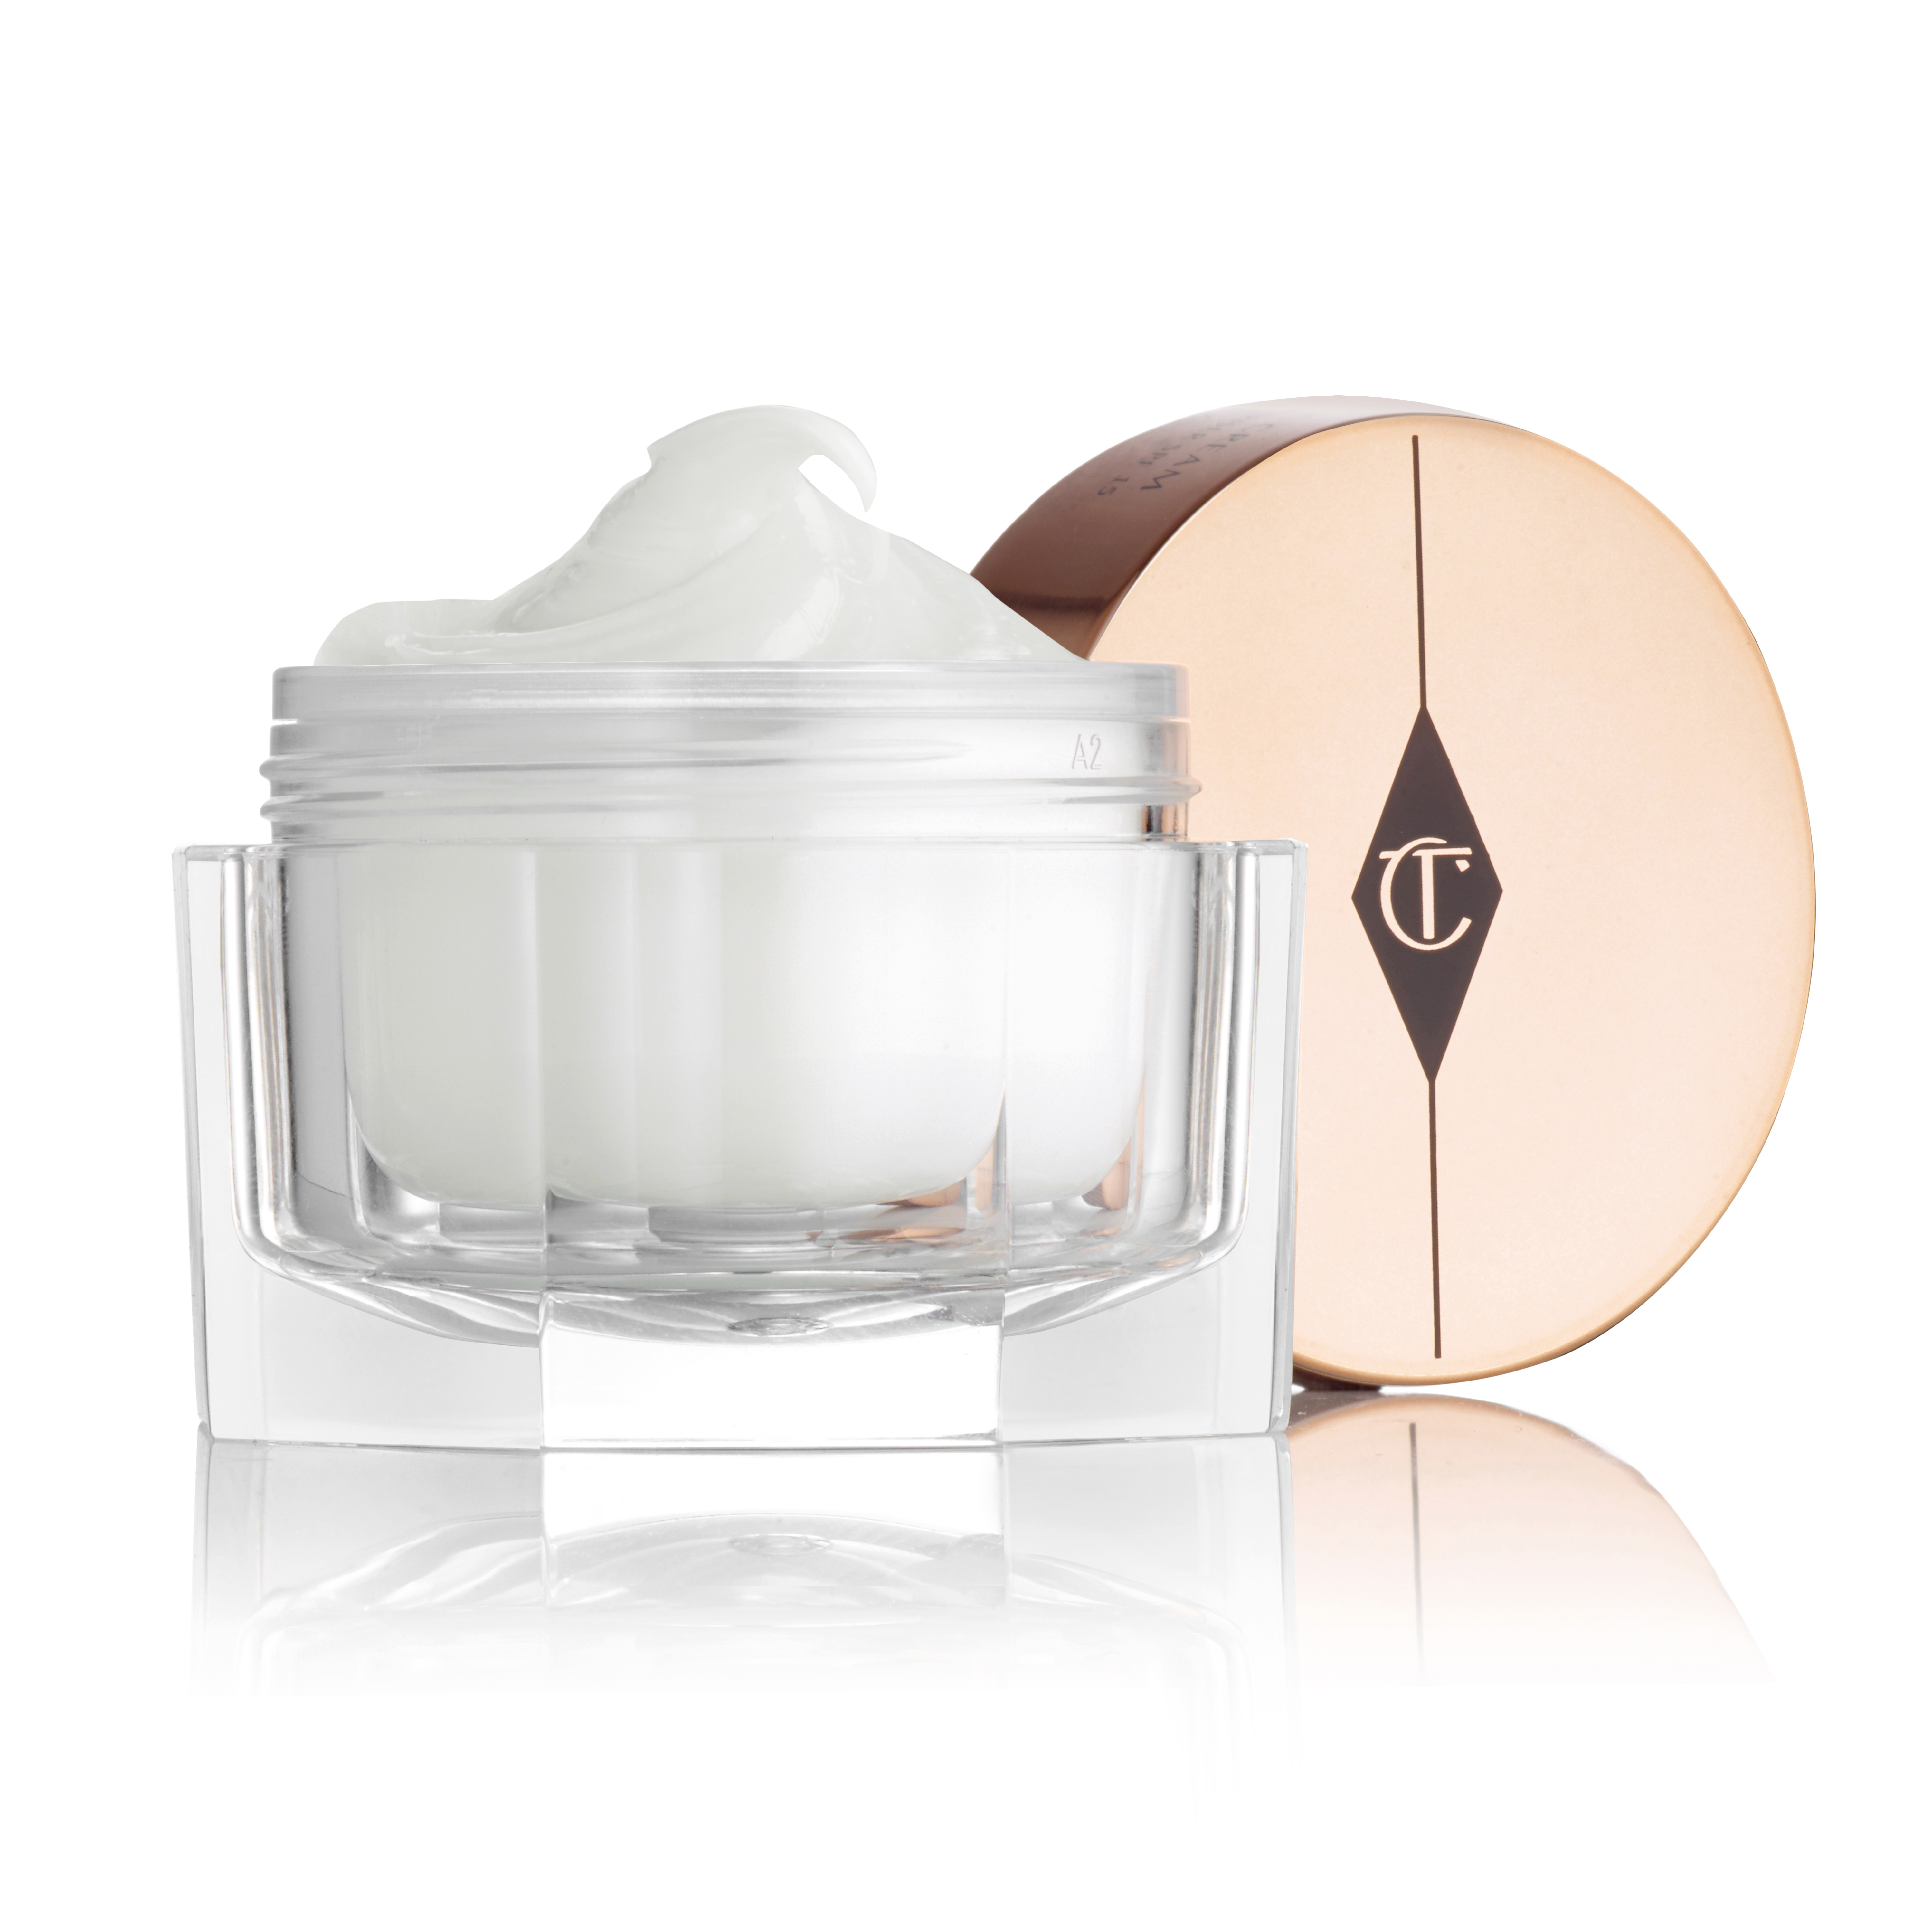 Charlotte Tilbury's best products include the Magic Cream